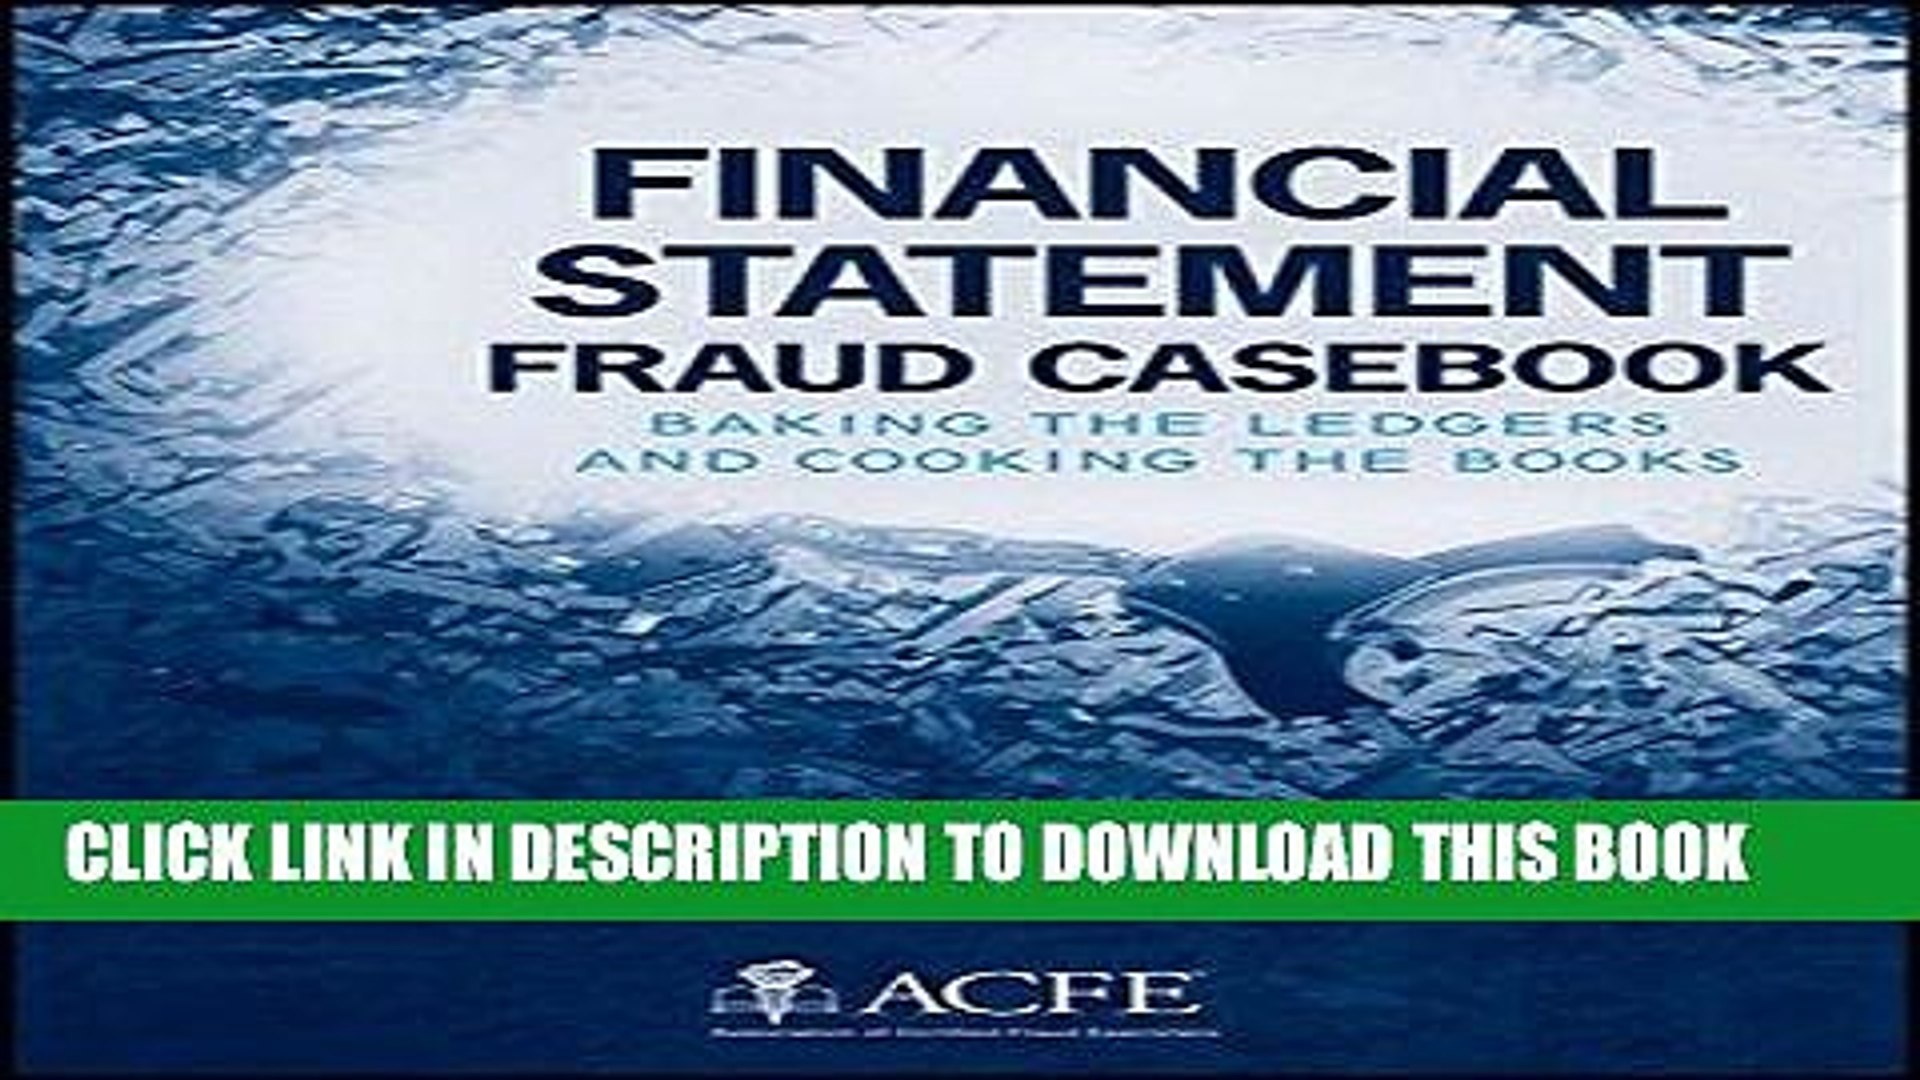 ⁣Best Seller Financial Statement Fraud Casebook: Baking the Ledgers and Cooking the Books Free Read